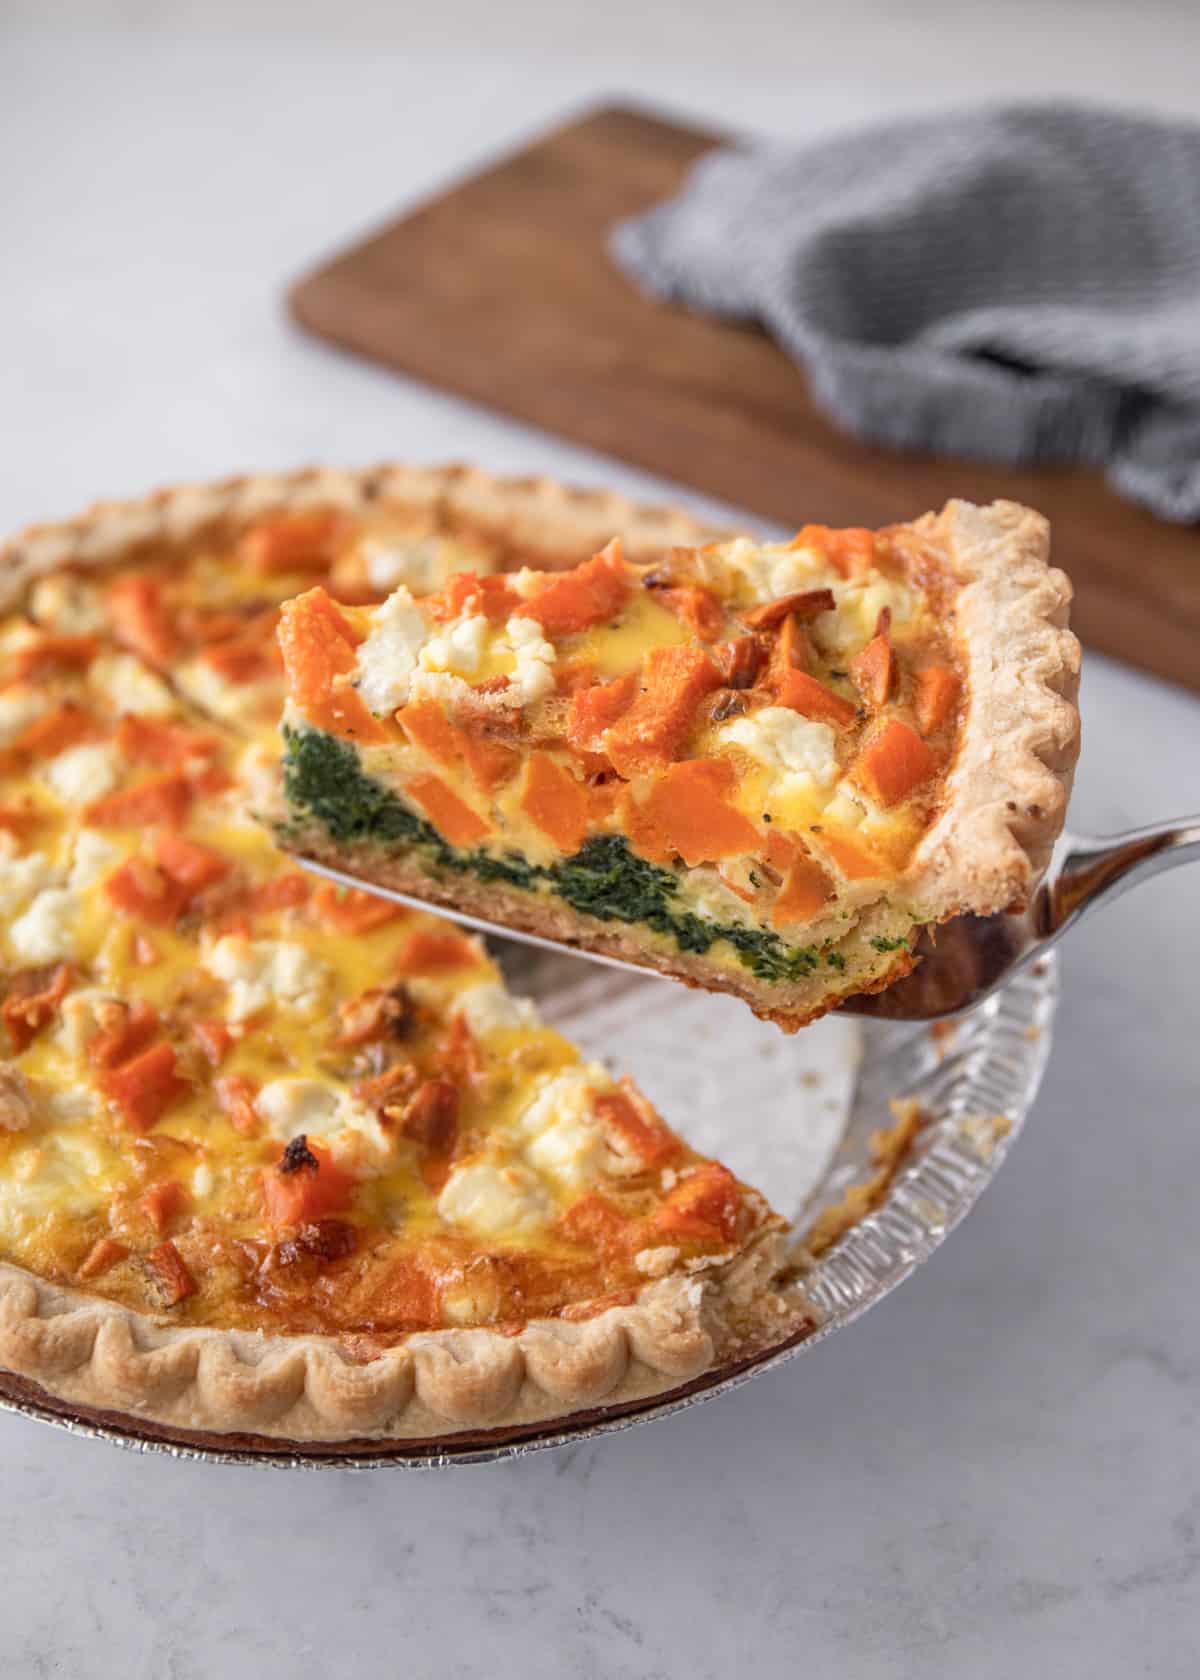 removing a slice from a quiche with a pie server